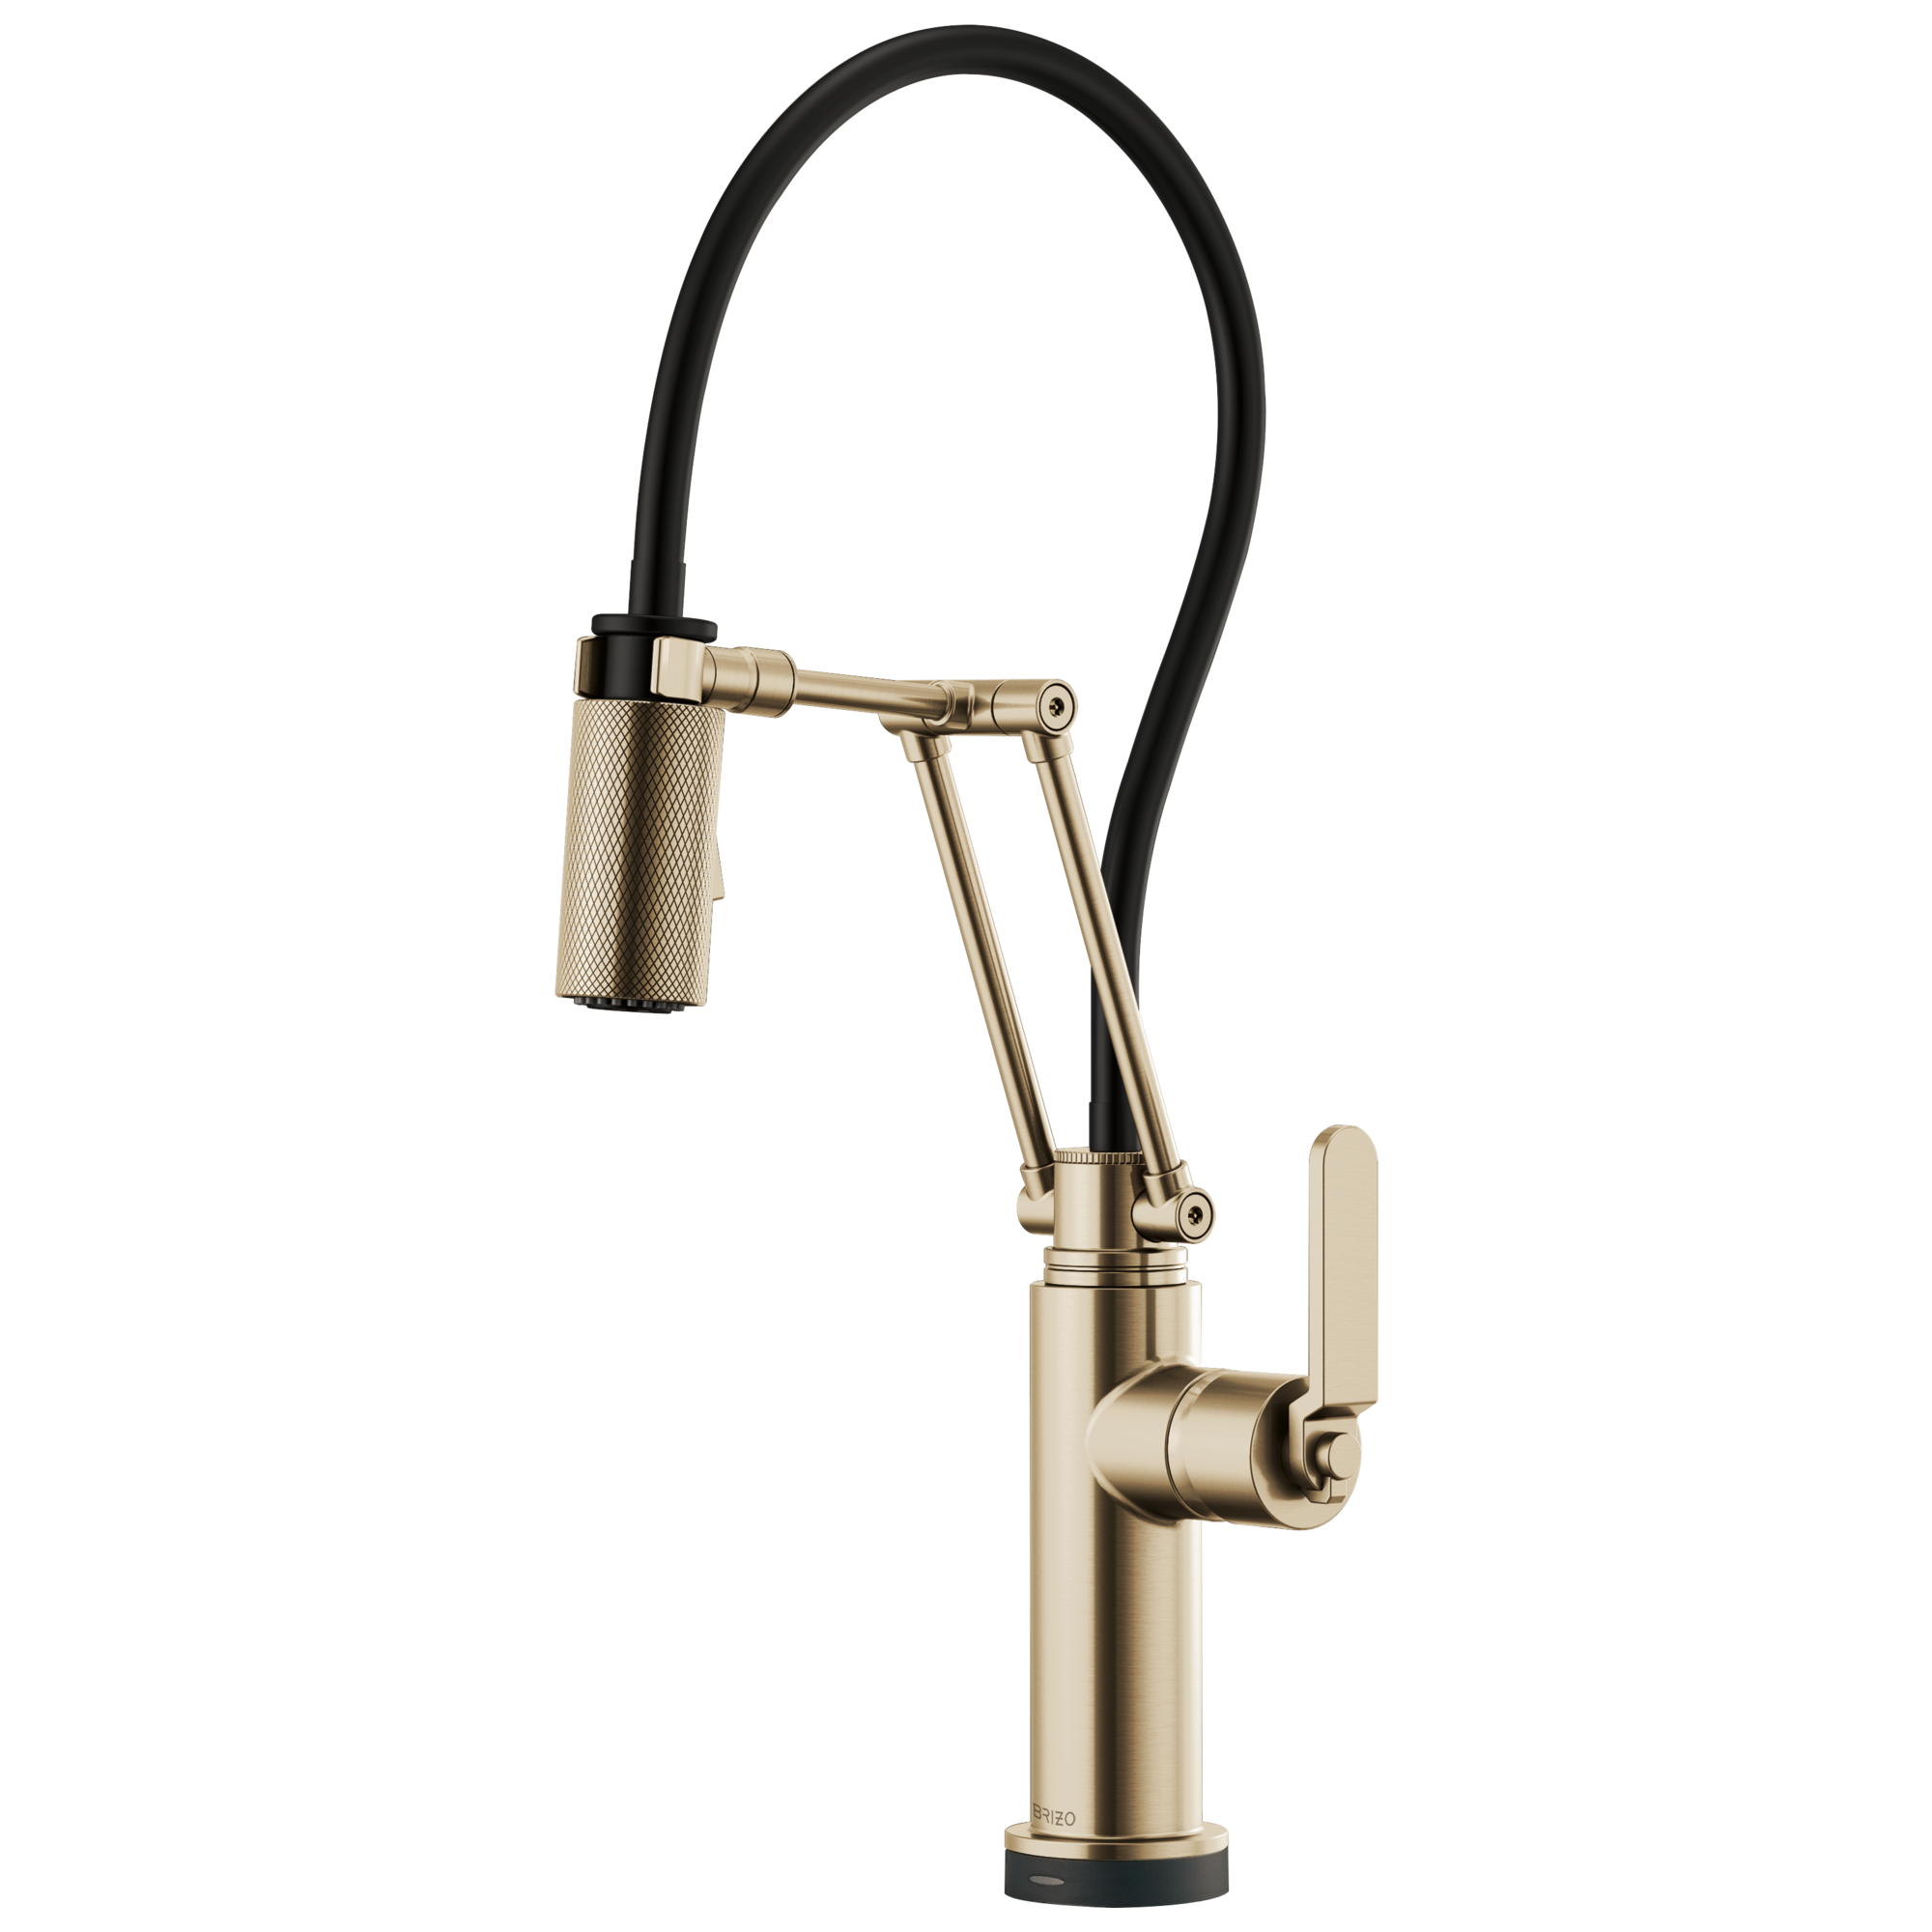 Brizo Litze Smart Touch Articulating Kitchen Faucet with Industrial Handle